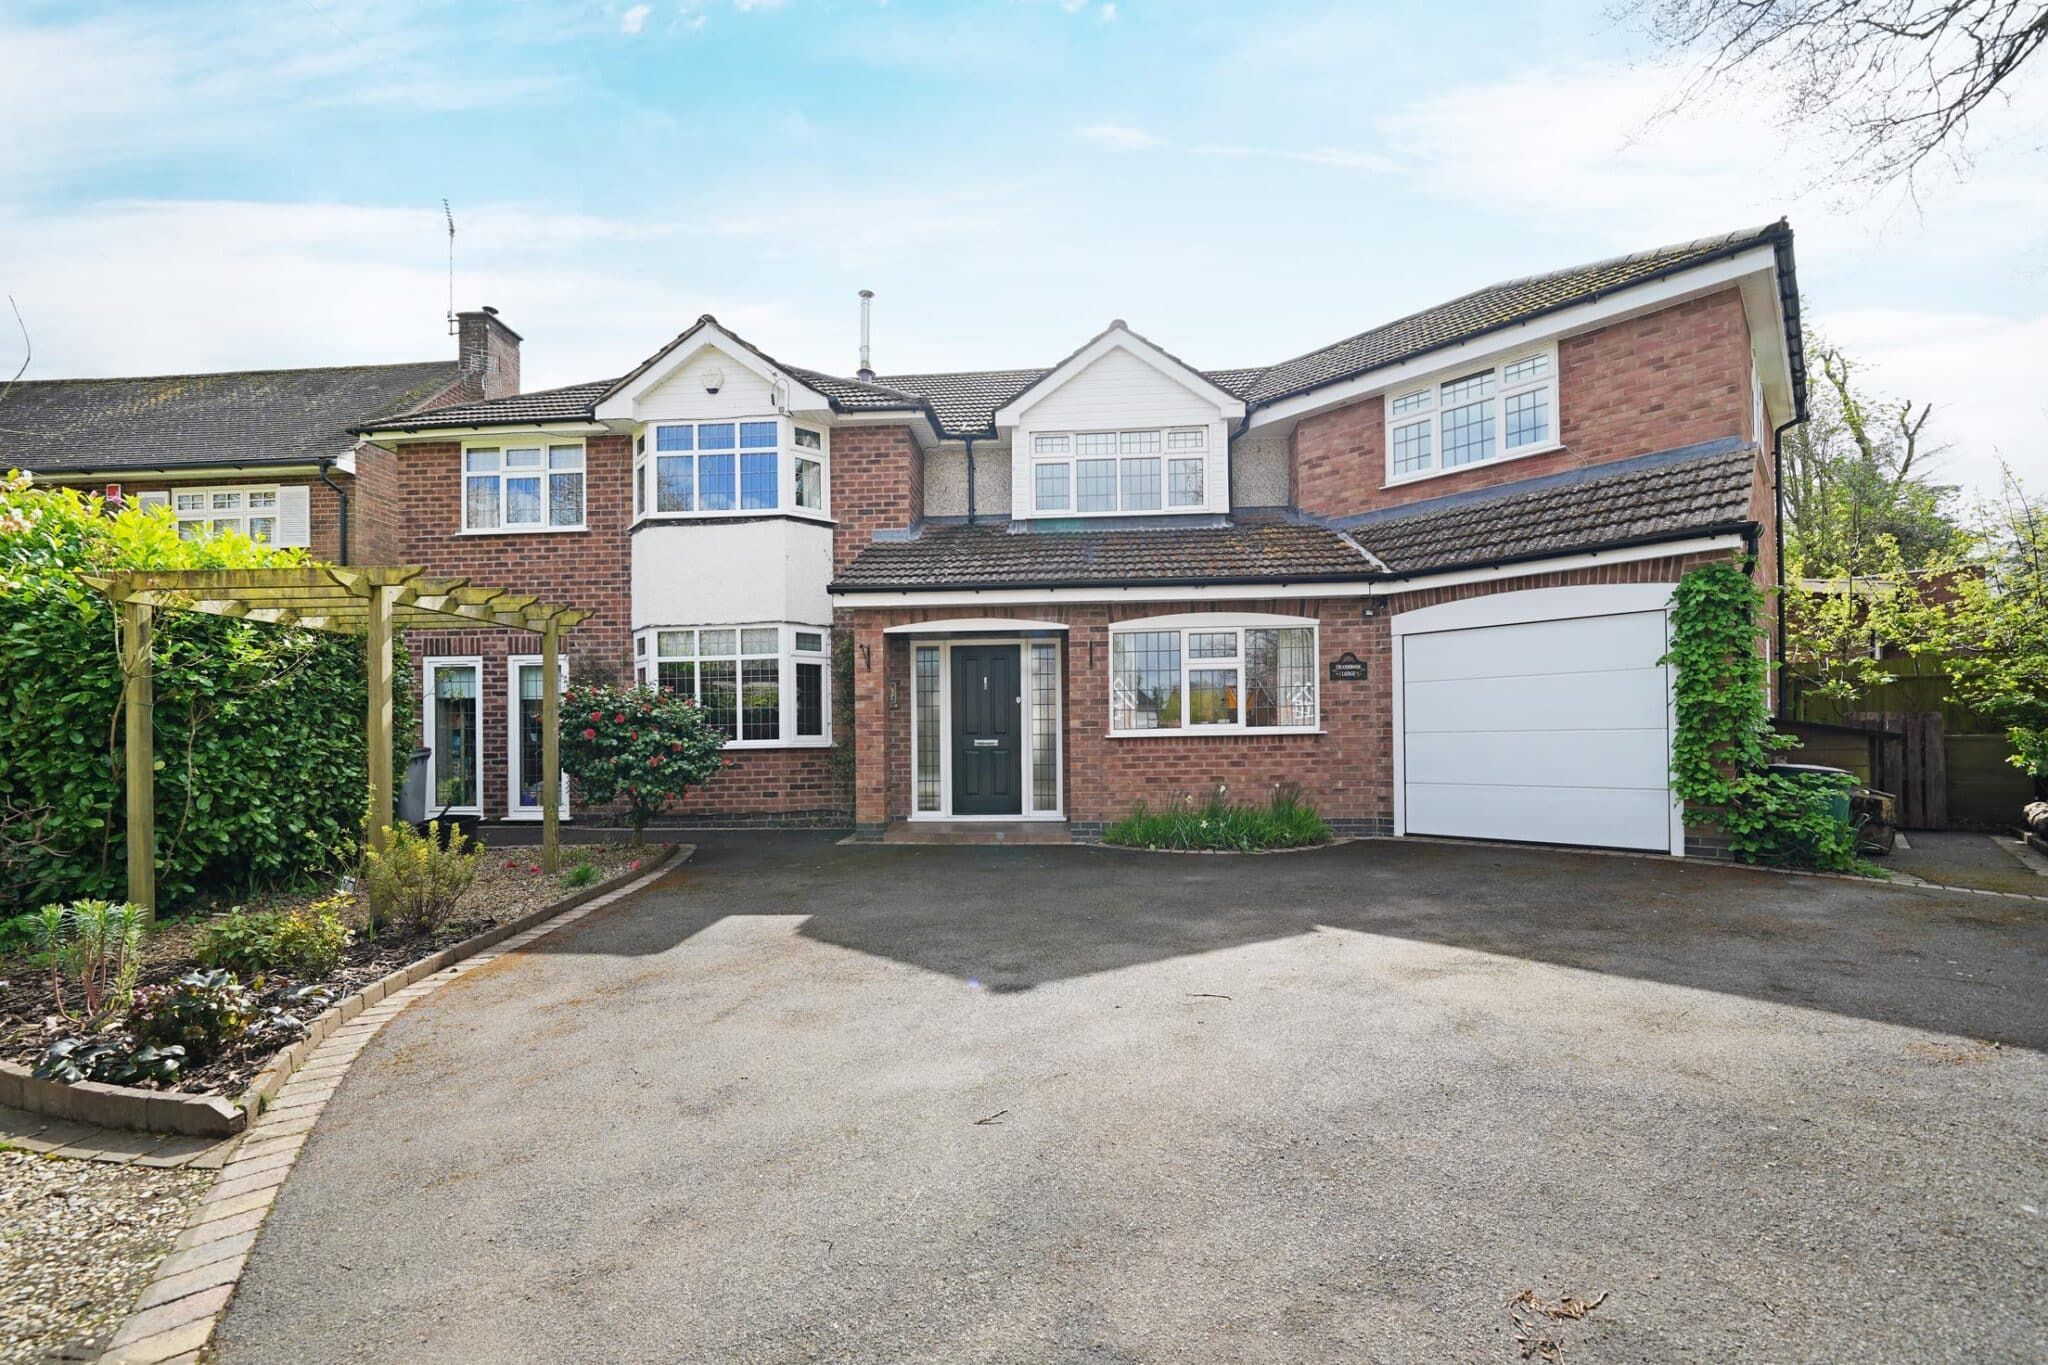 Cranbrook Lodge Holly Lane, Balsall Common, Coventry, Coventry, CV7 7EA